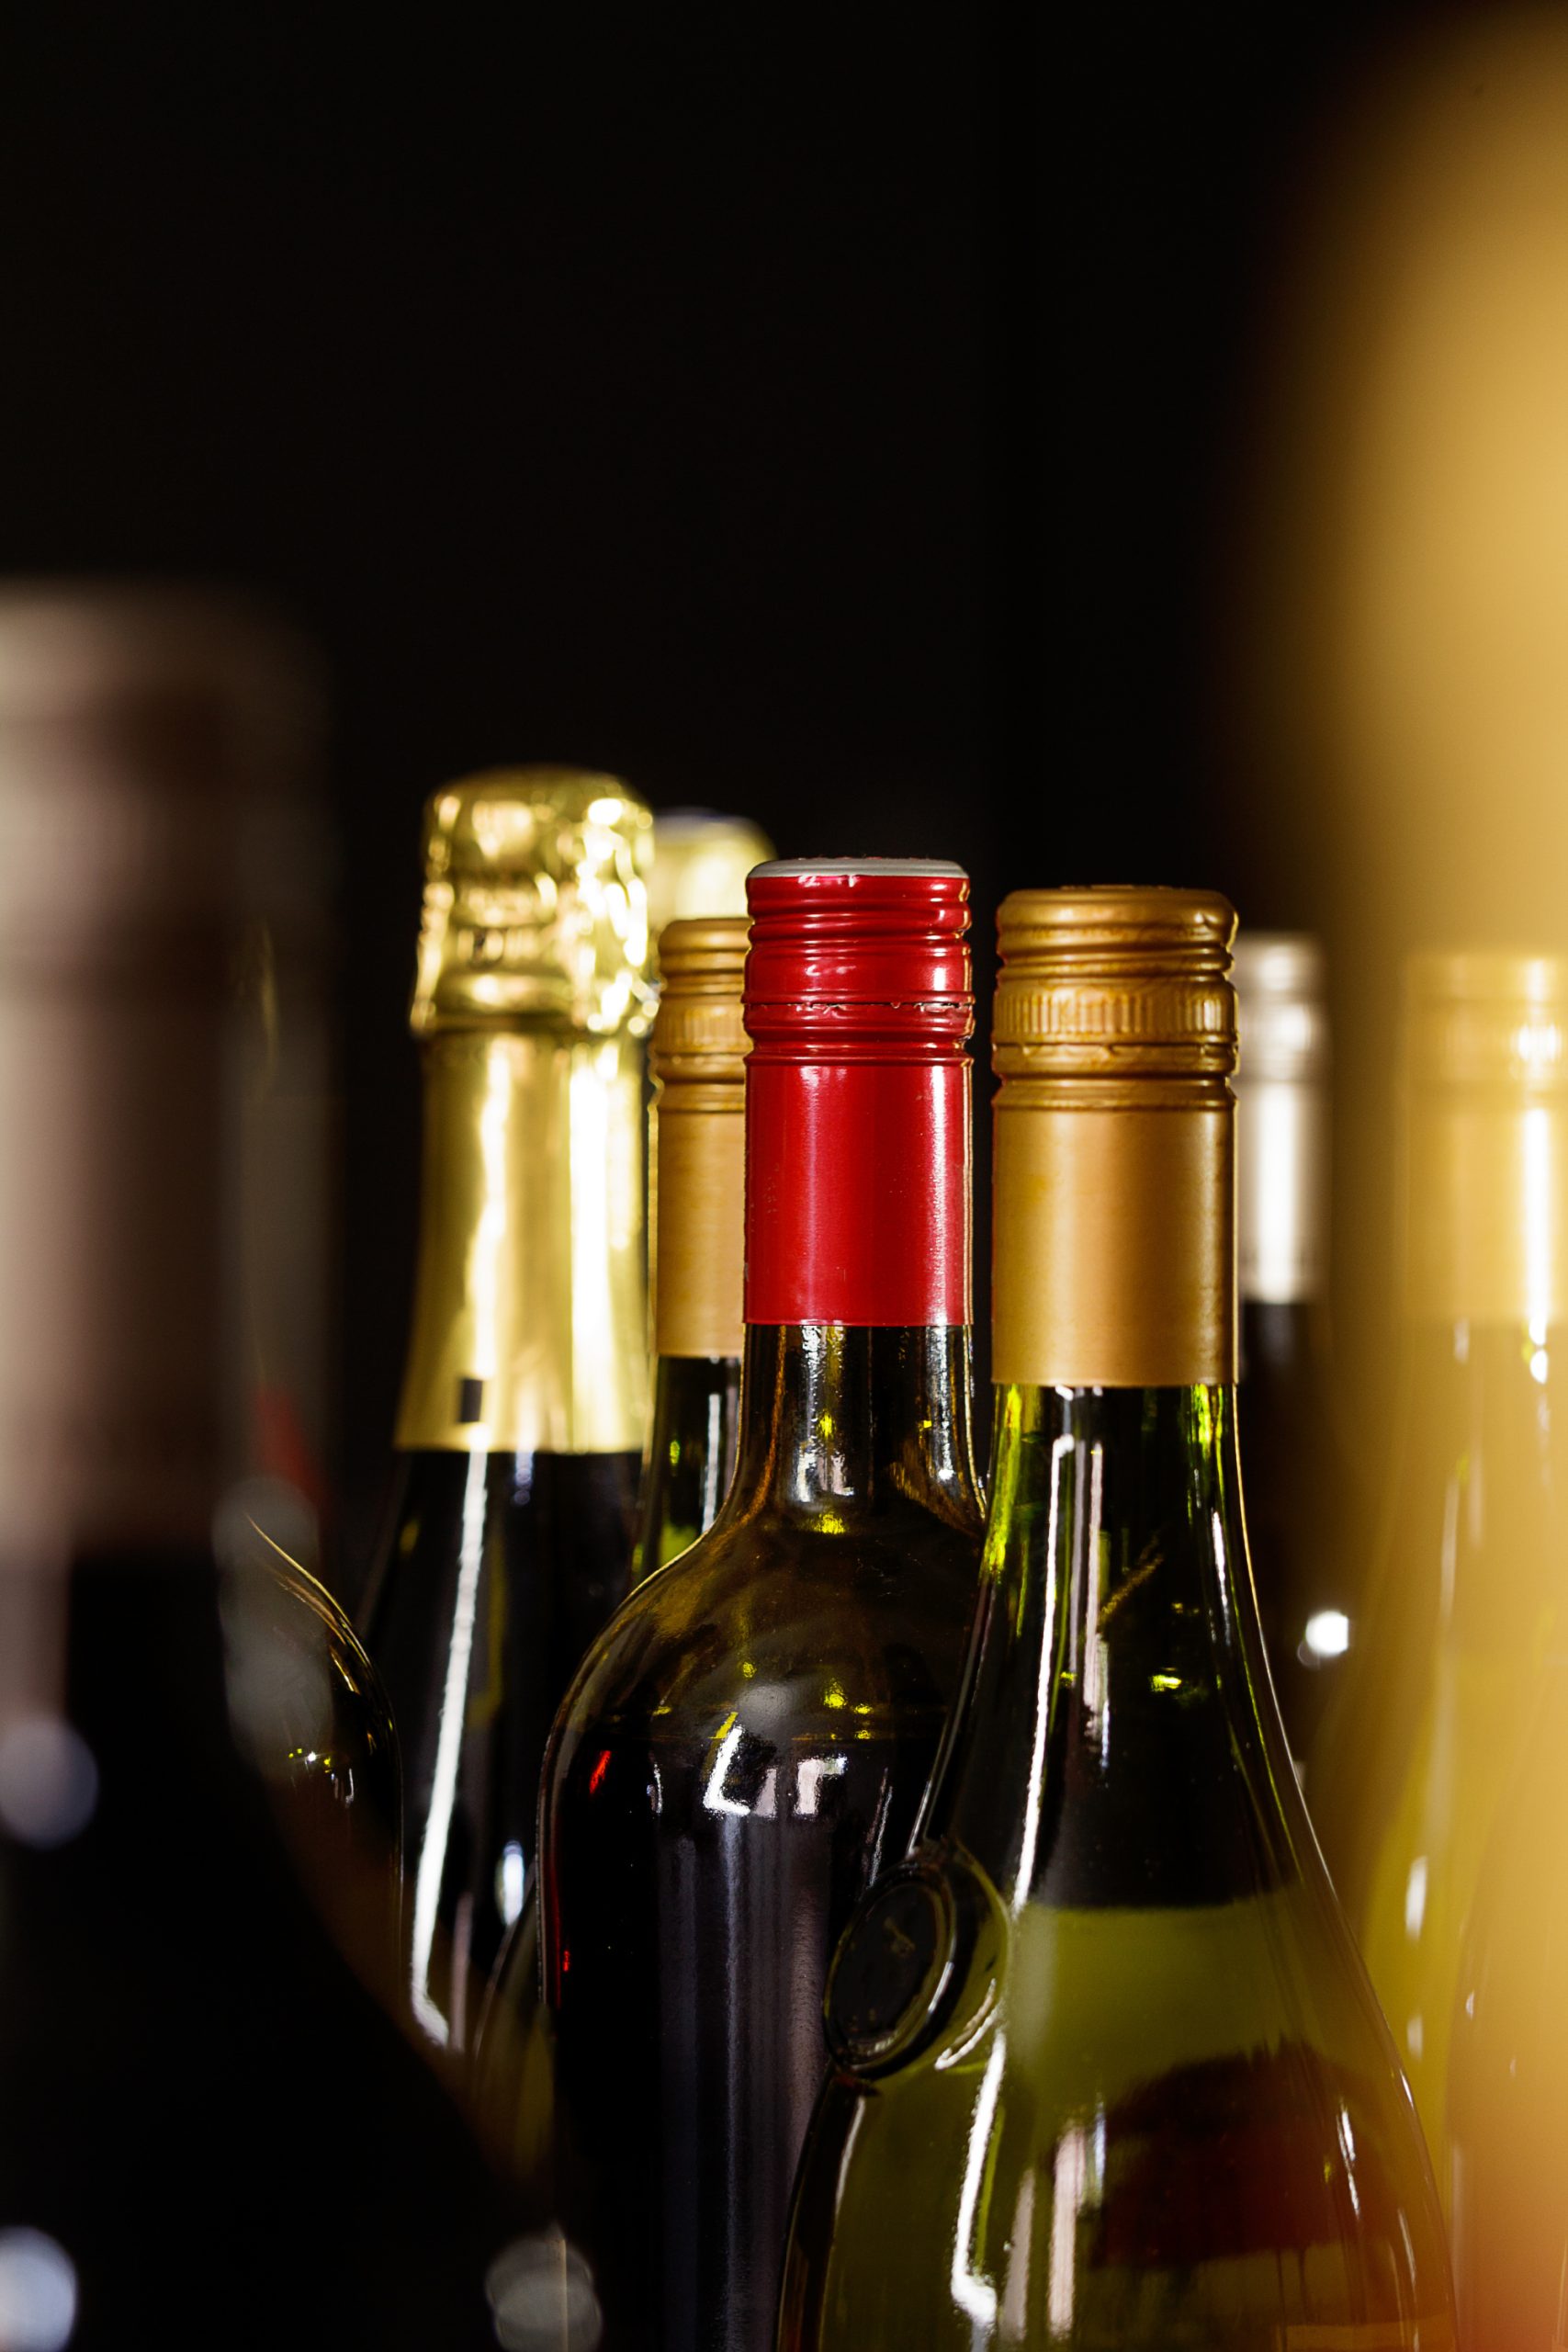 A row of wine bottles on a black background.